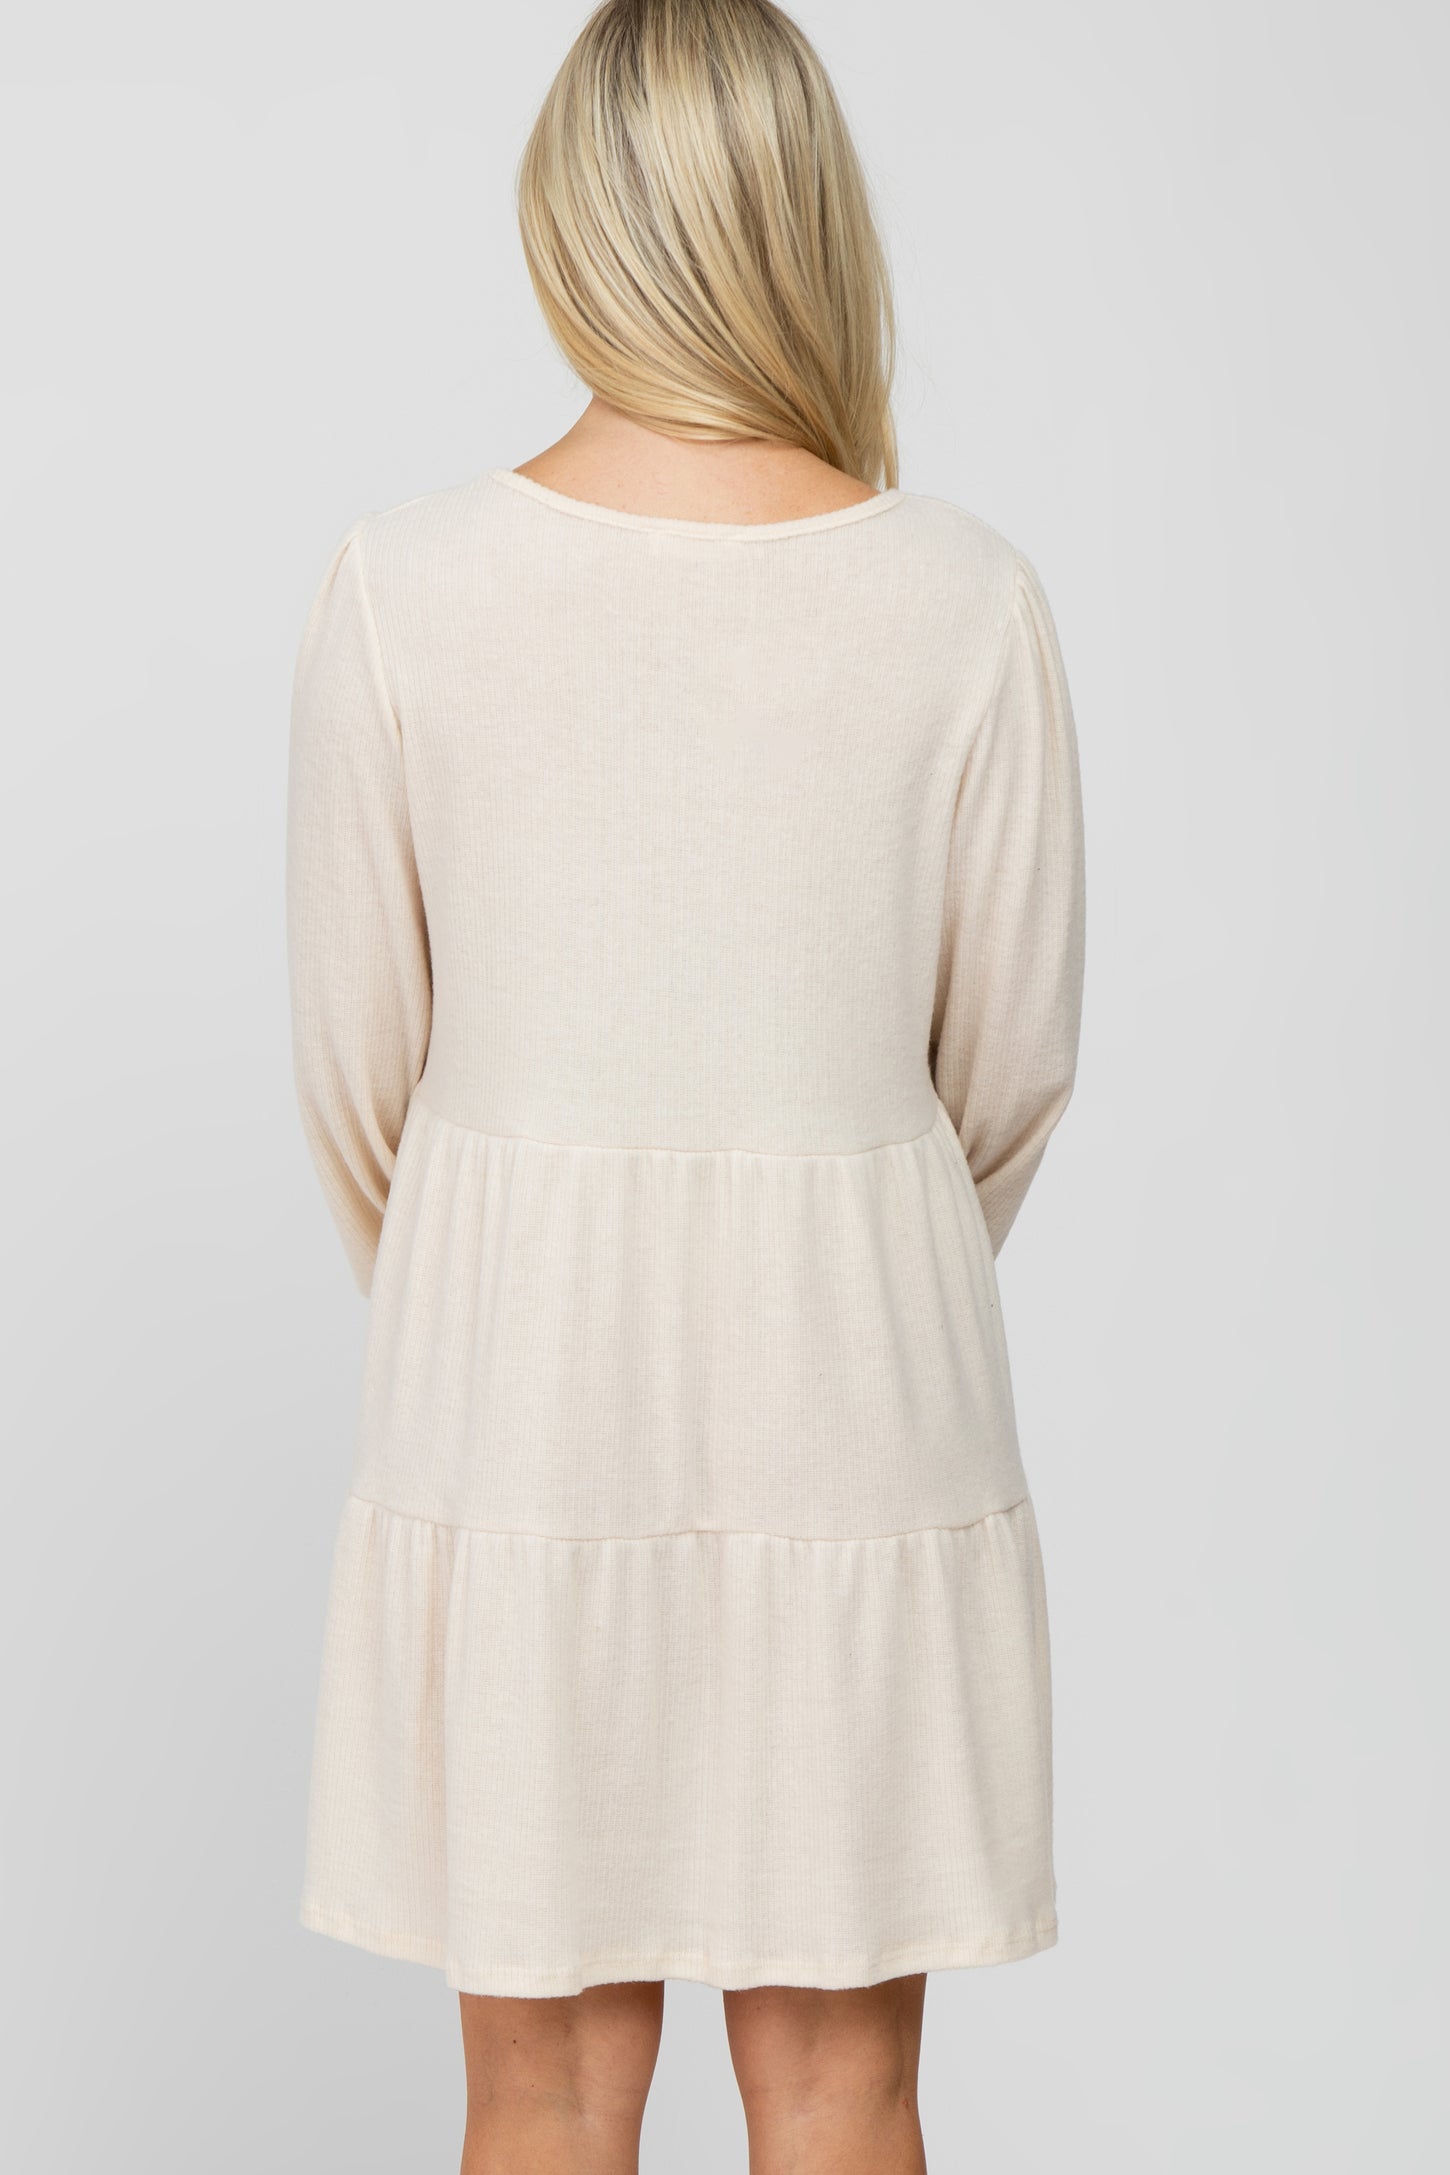 Cream Brushed Knit Tiered Maternity Dress